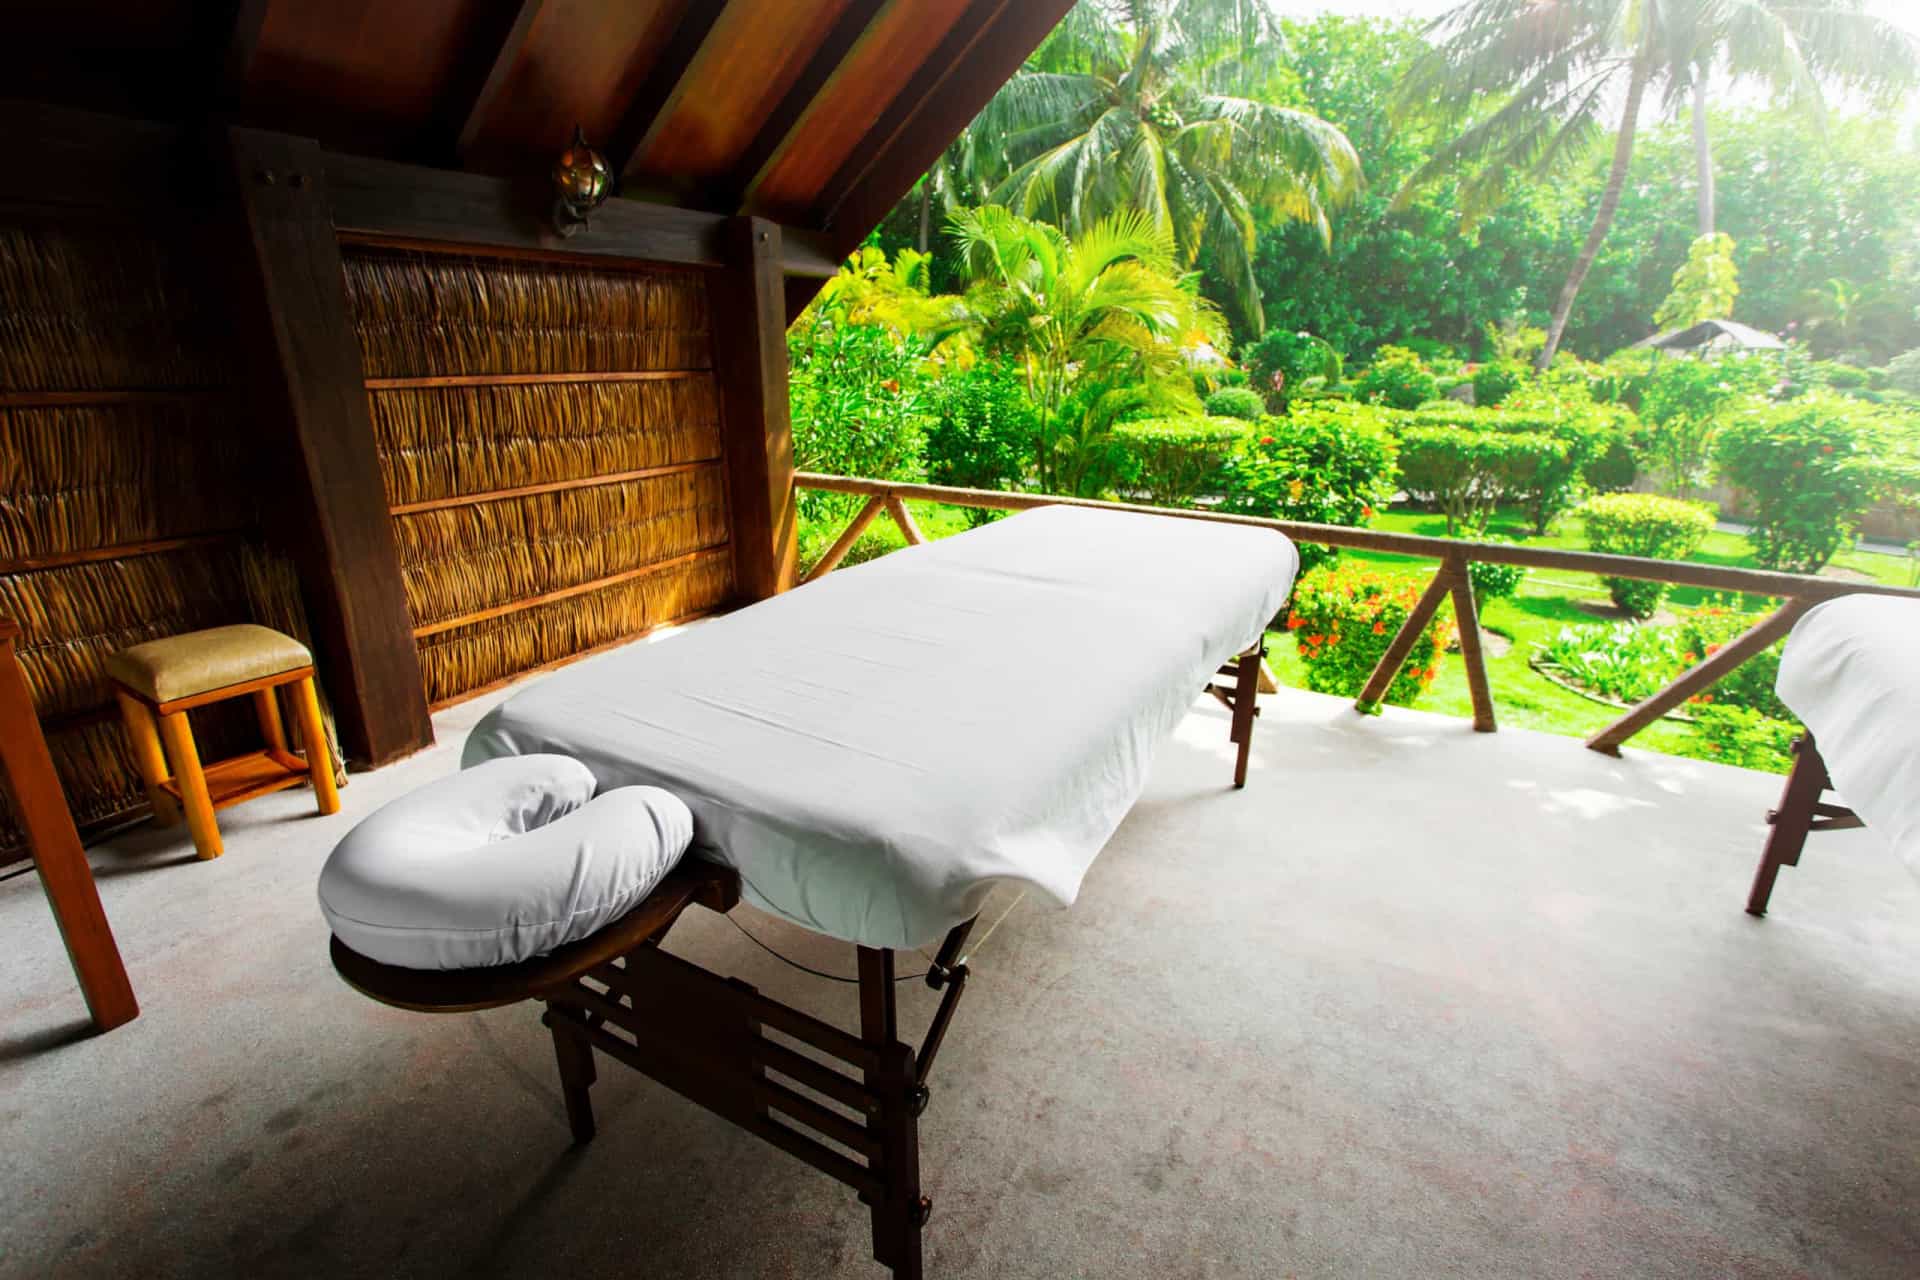 <p>There are world-renowned spas in the Maldives that sometimes take up whole islands. The sand and Sri Lankan-inspired spa techniques are tremendously relaxing and restorative.</p>